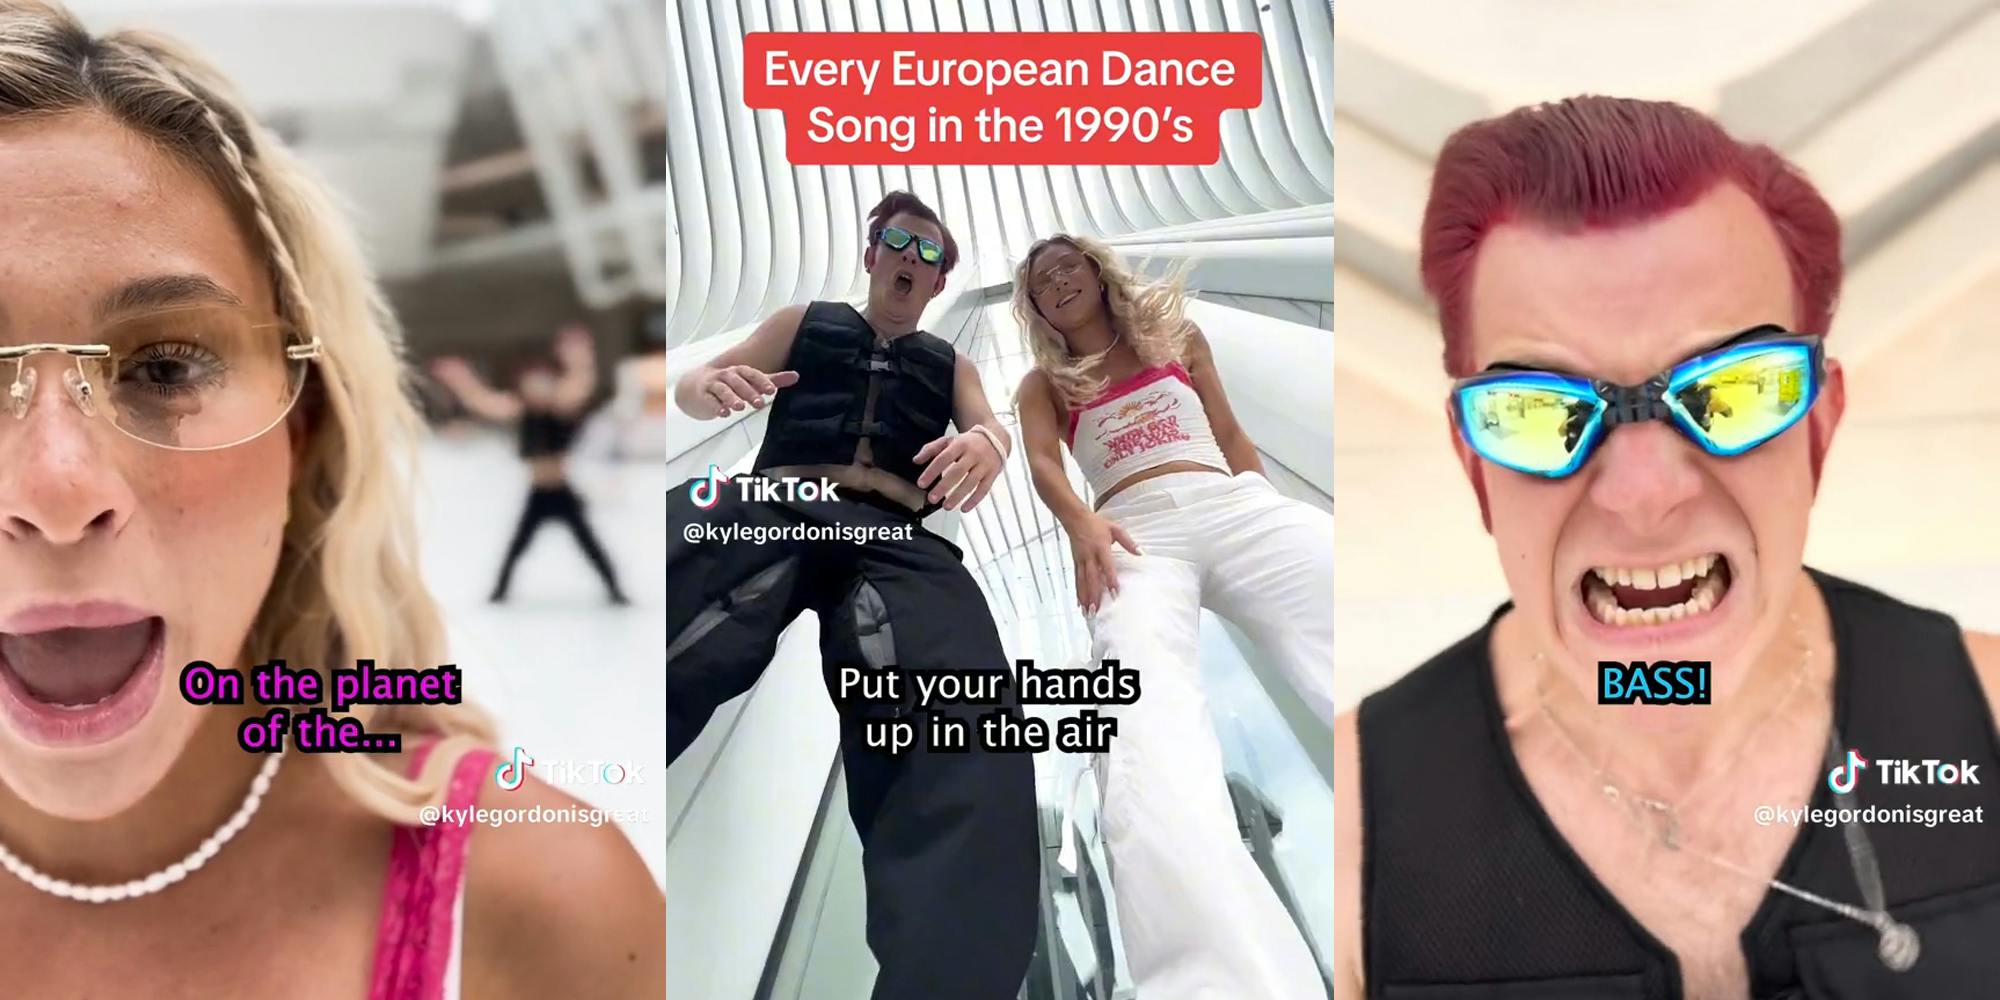 man and woman dancing with caption "every european dance song in the 1990s"